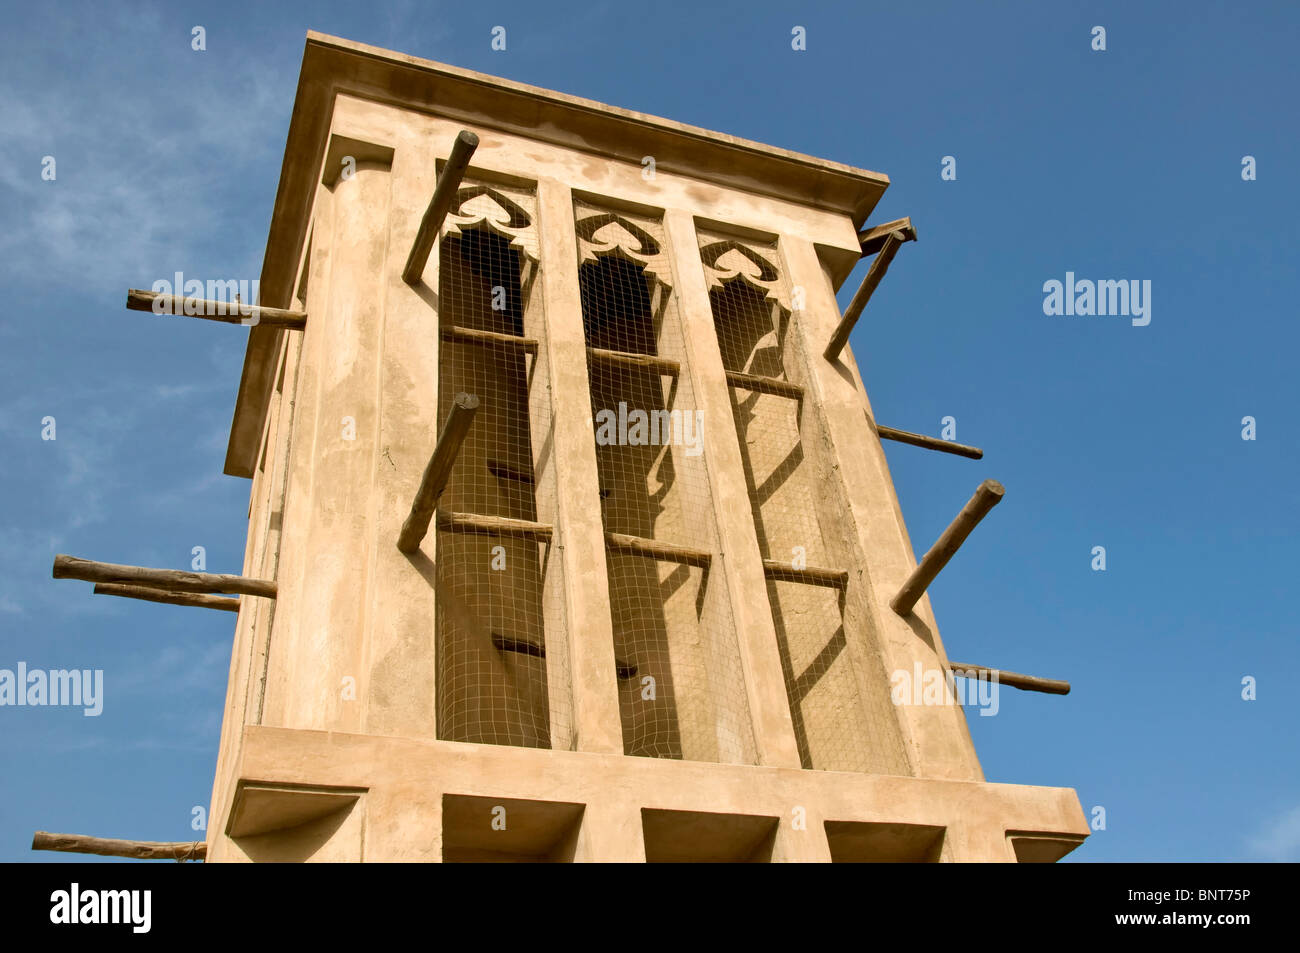 Traditional wind tower in the historical district of Bastakia Dubai UAE Stock Photo